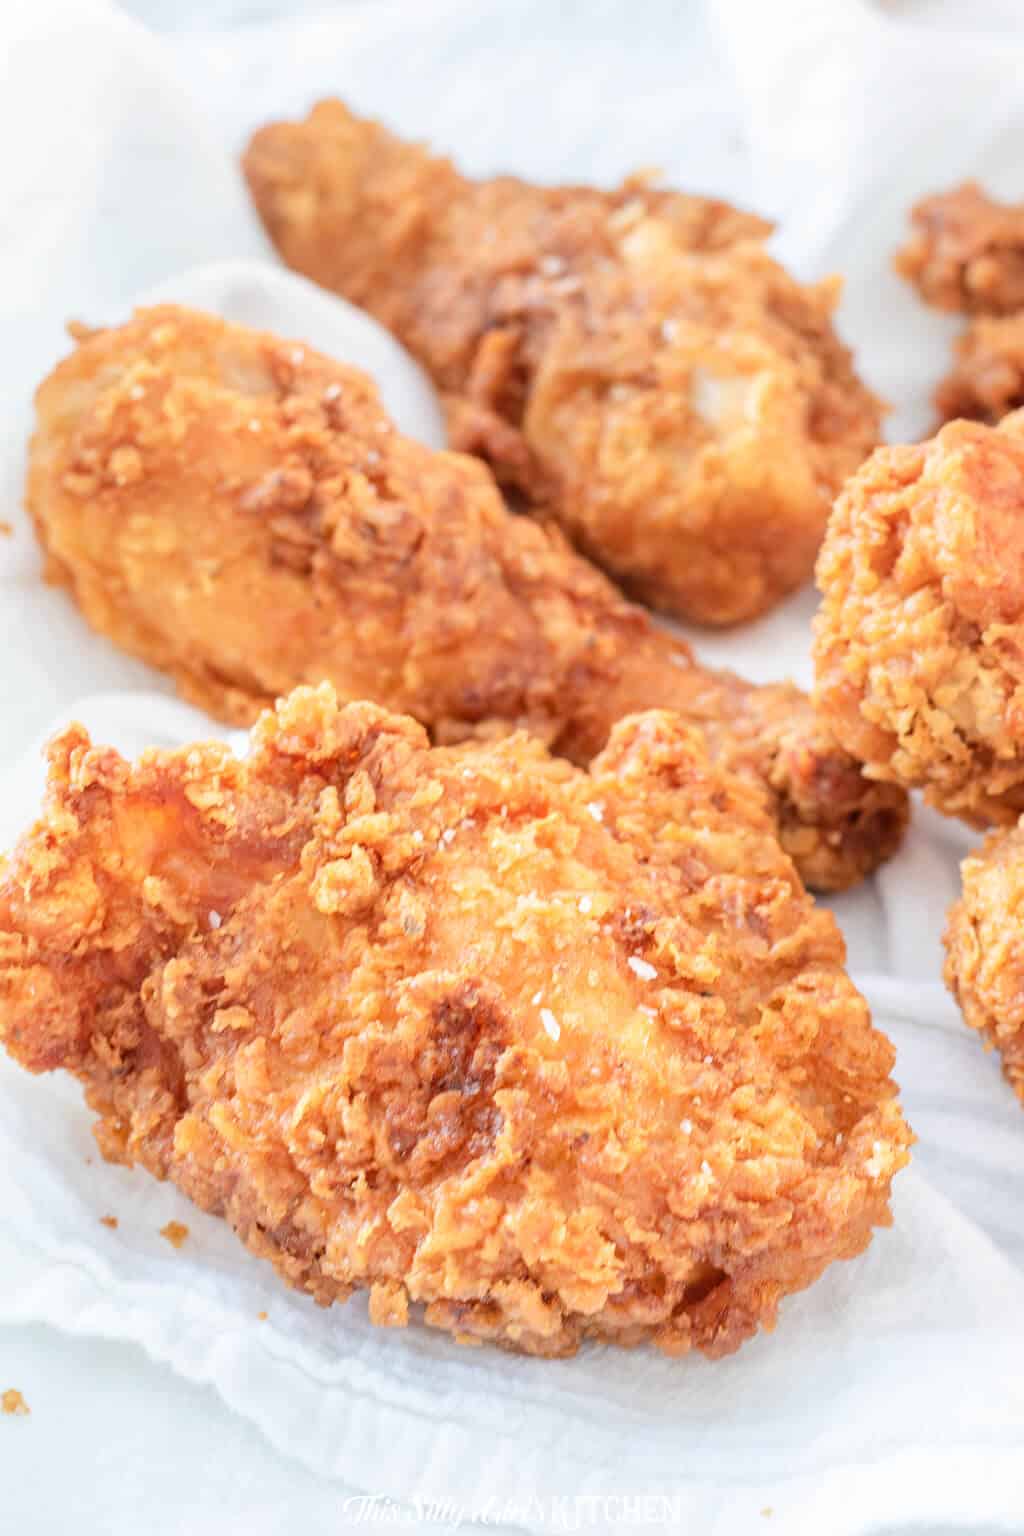 Southern Fried Chicken - This Silly Girl's Kitchen